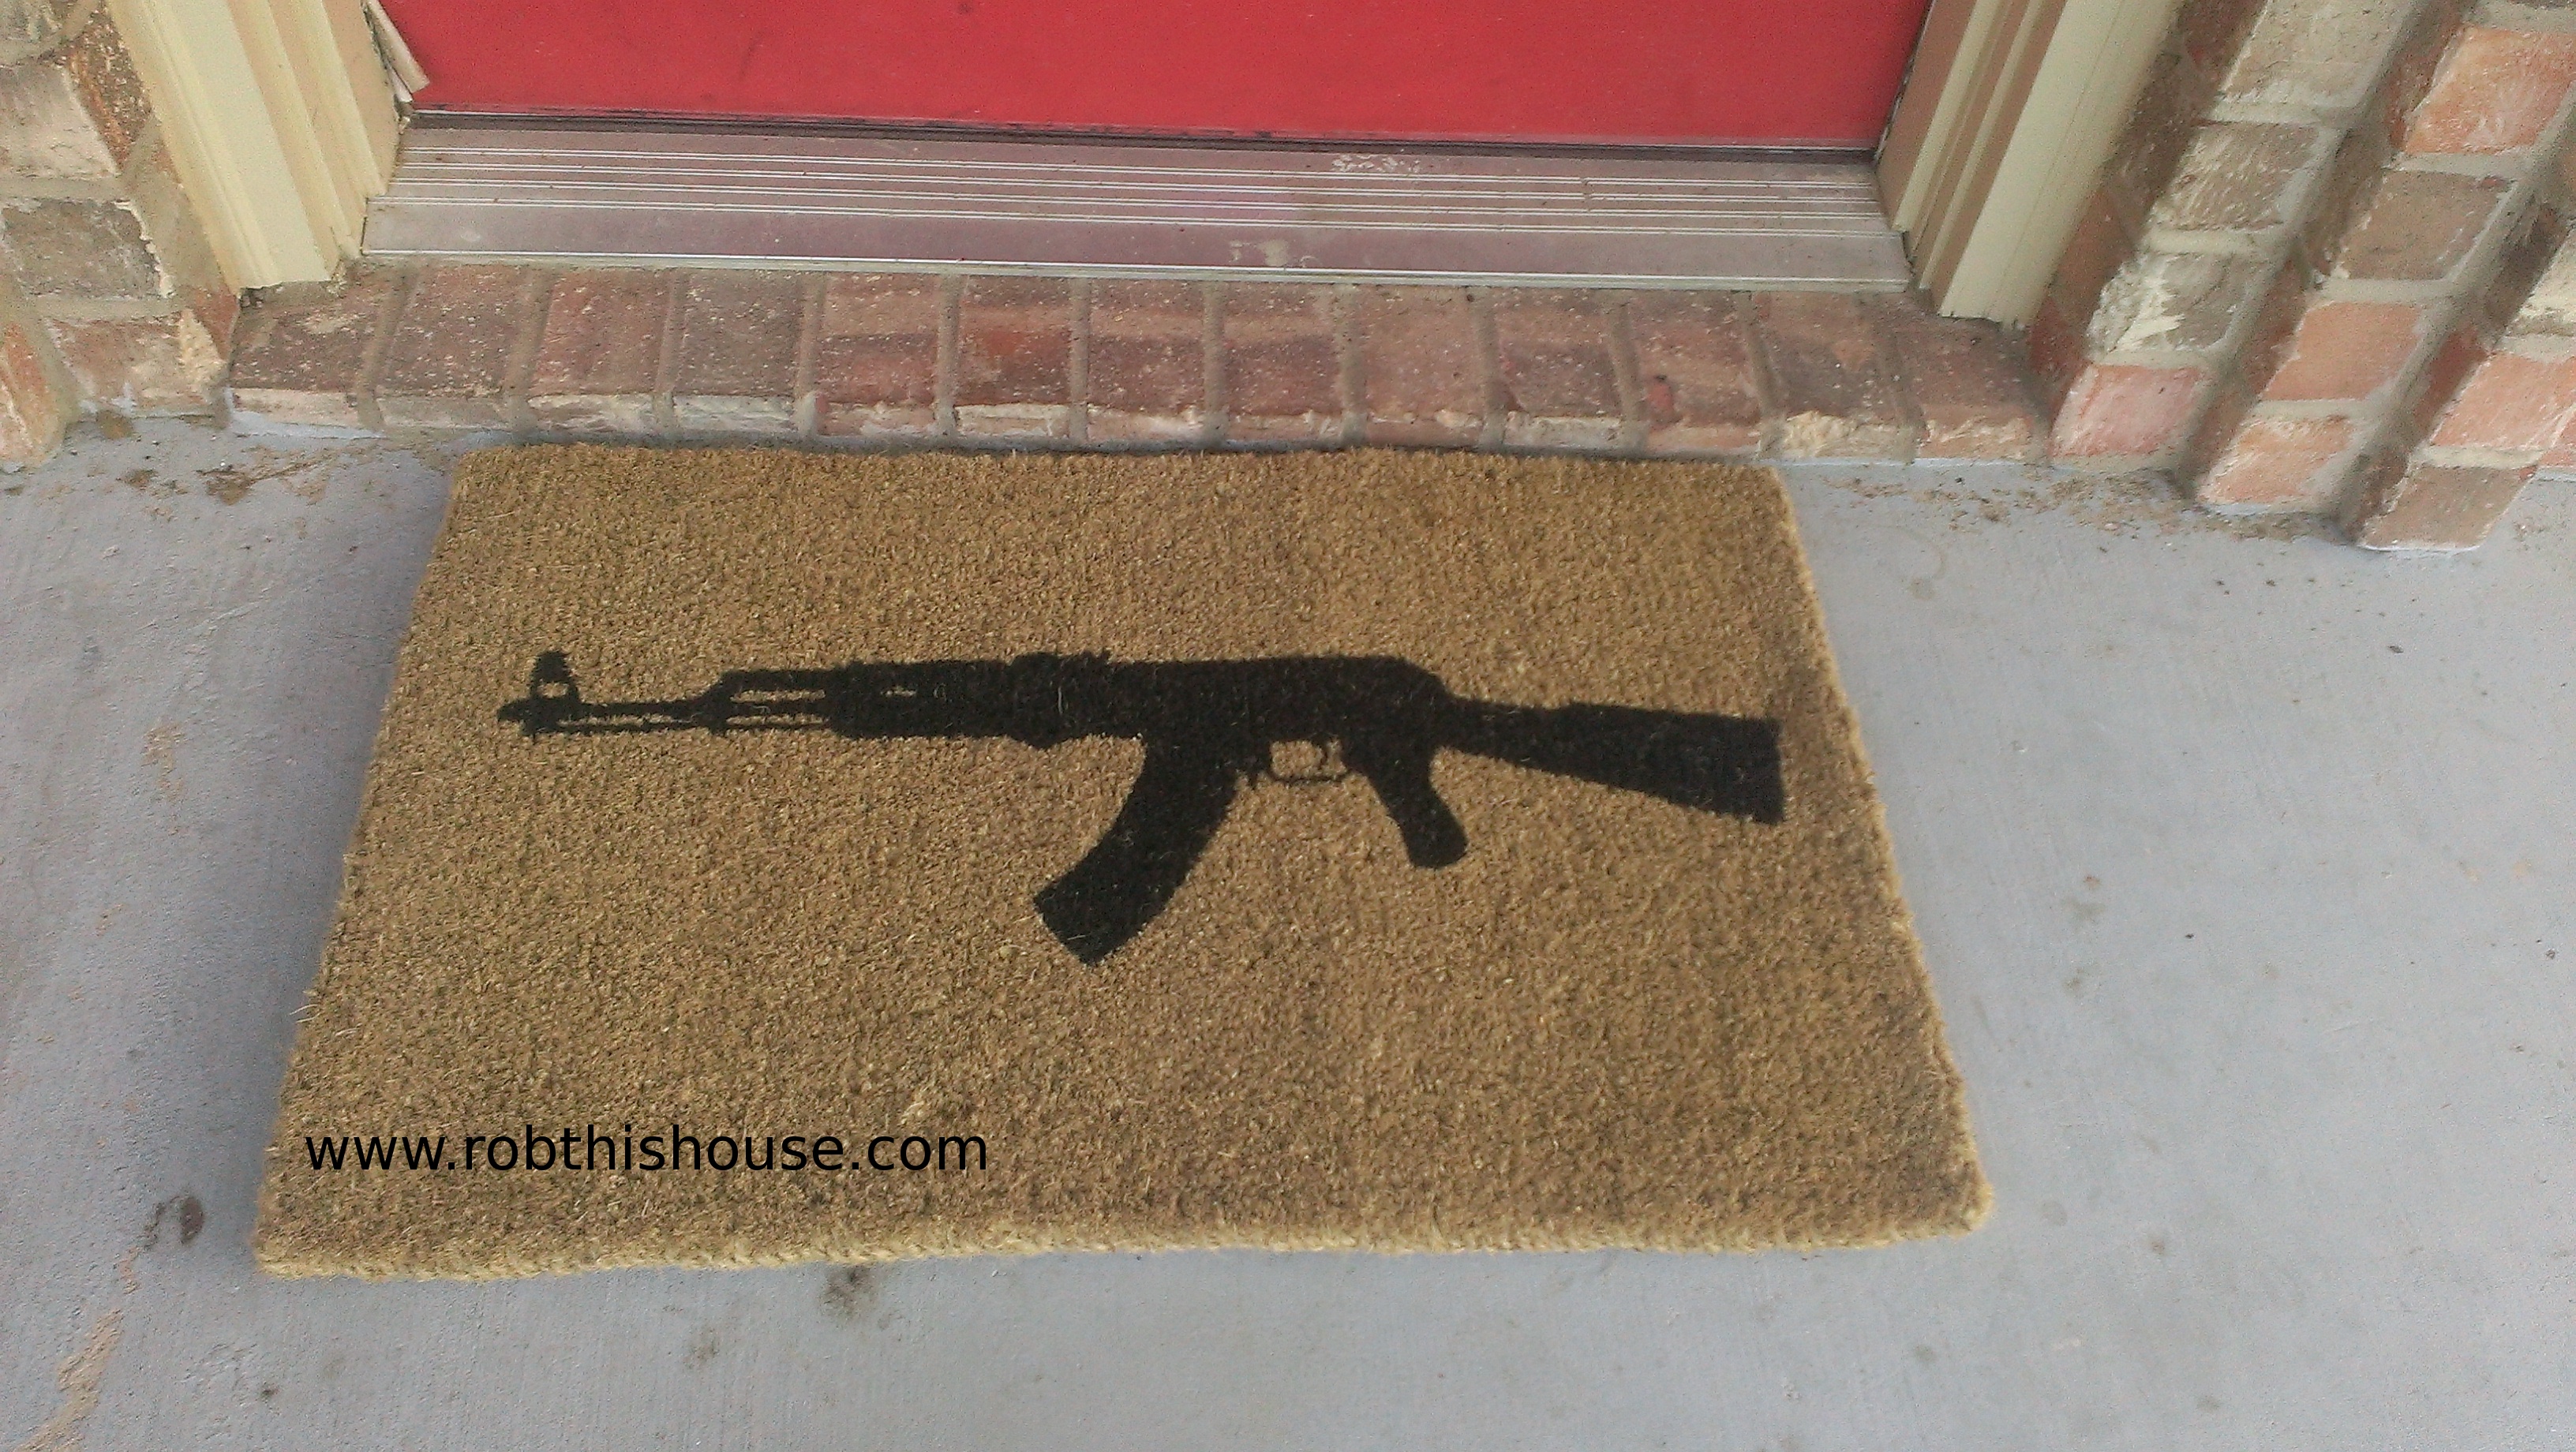 AK 47 Unwelcome mat from www.robthishouse.com  Pretty unique.